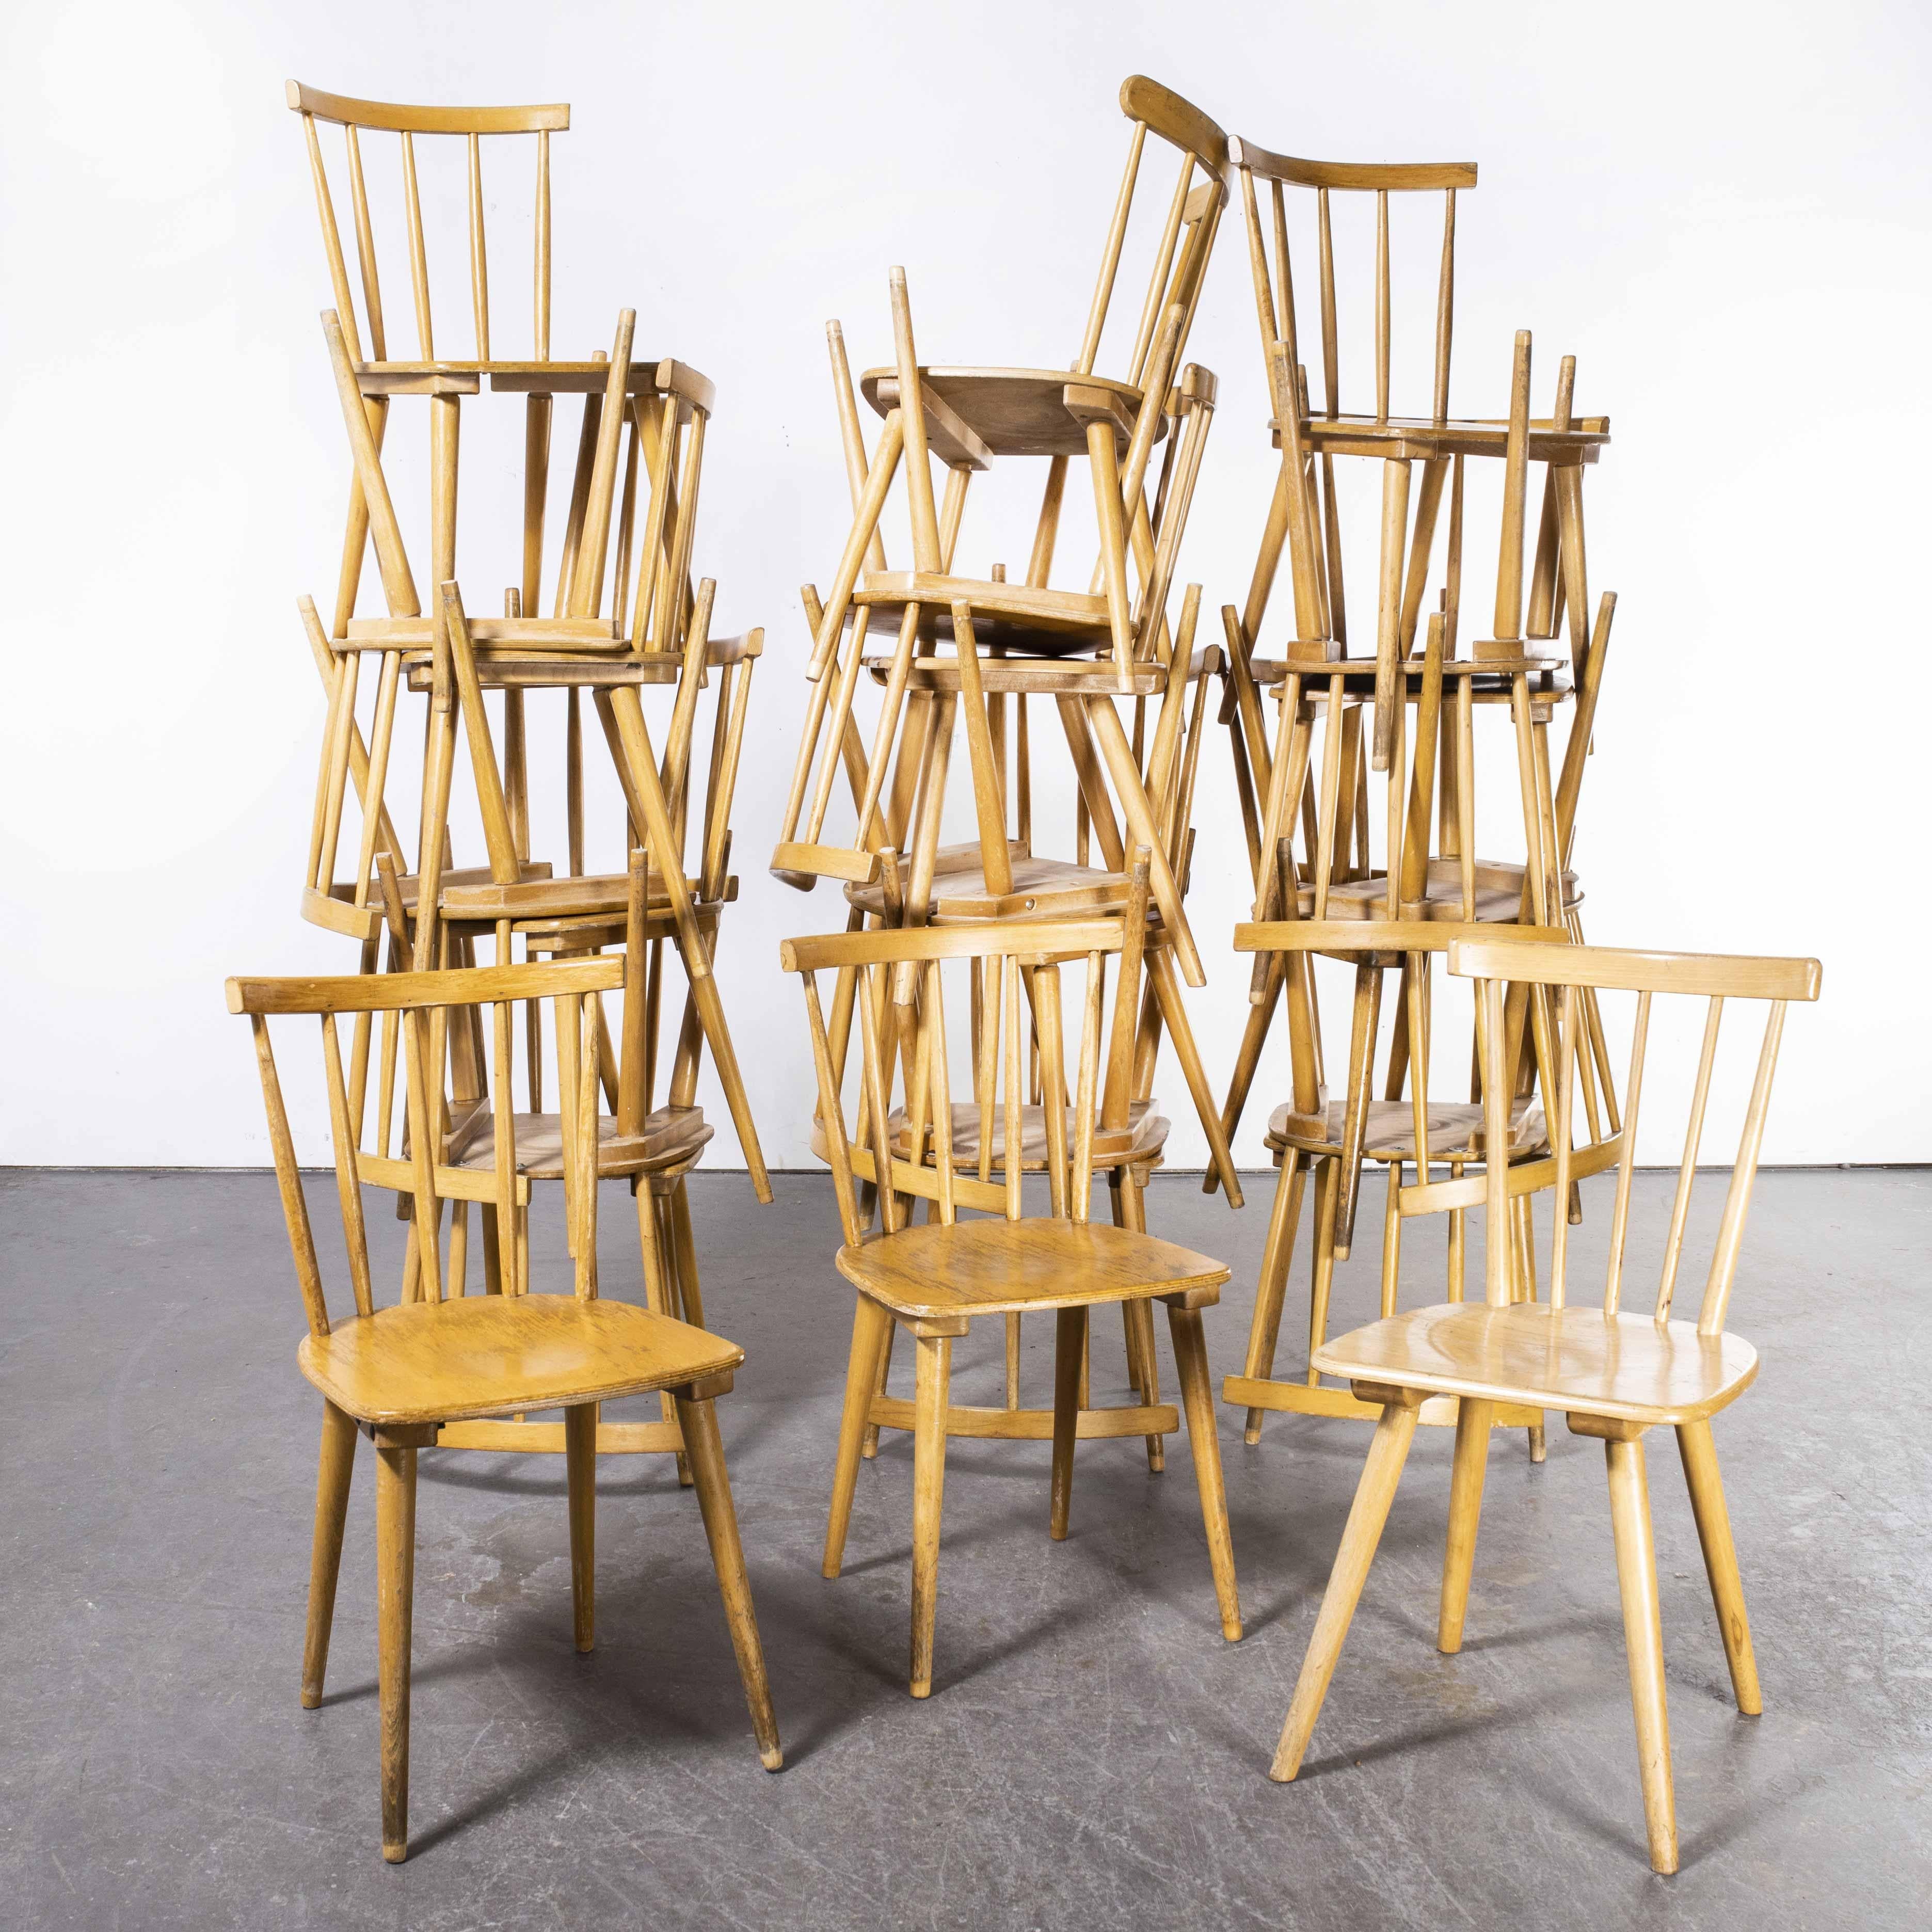 1950’s French Slim Back Stick Back dining chairs – Various Quantities Available
1950’s French Slim Back Stick Back dining chairs – Various Quantities Available. Classic French stick back dining chairs made in beech wood with a lovely warm colour